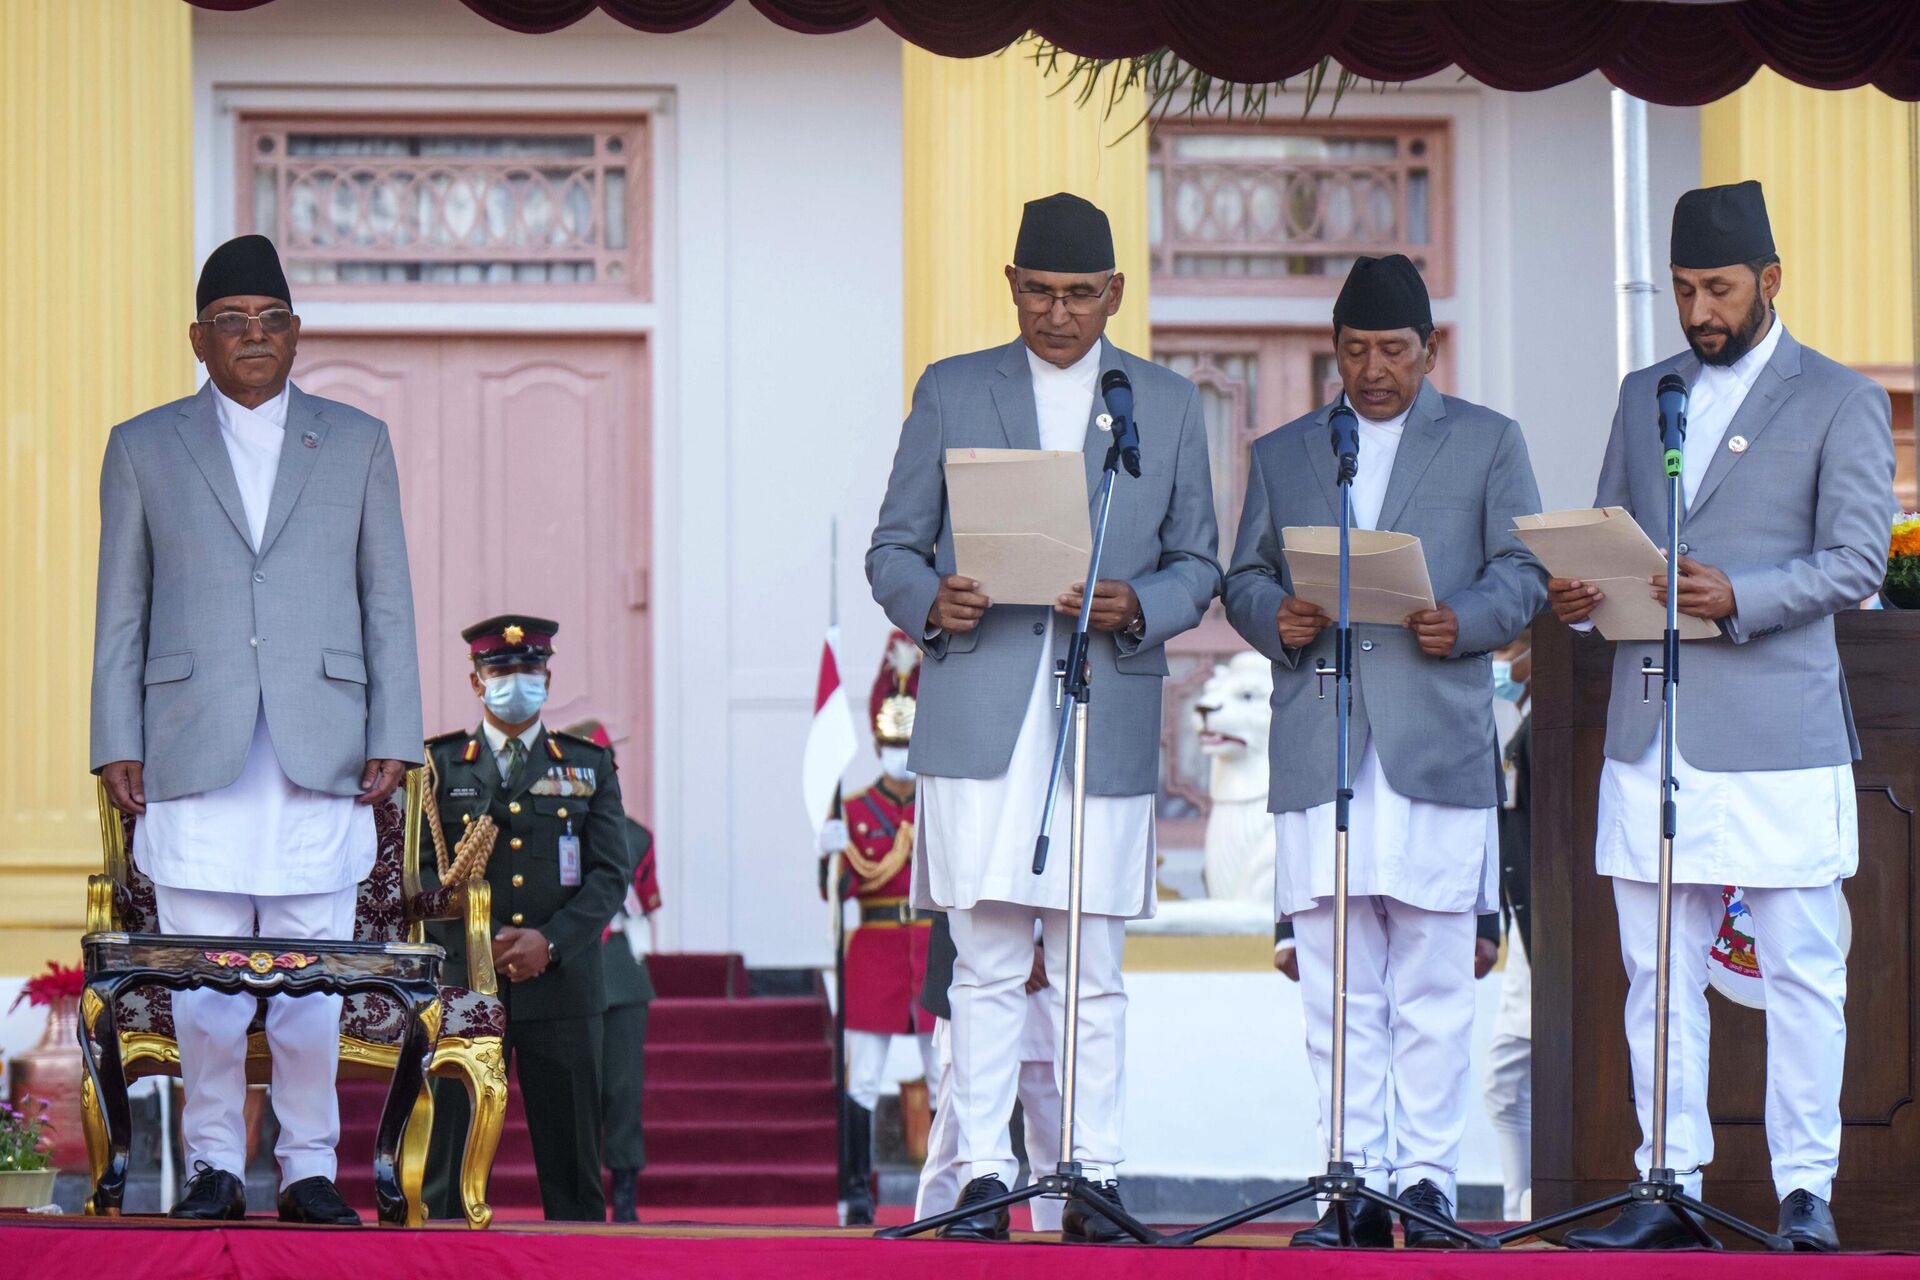 Nepal's newly appointed prime minister Pushpa Kamal Dahal, left, looks on as his deputies, from right, Rabi Lamichhane, Narayan Kaji Shrestha and Bishnu Paudel are being sworn in during a ceremony at the President House during a ceremony in Kathmandu, Nepal, Monday, Dec. 26, 2022. - Sputnik India, 1920, 10.03.2023